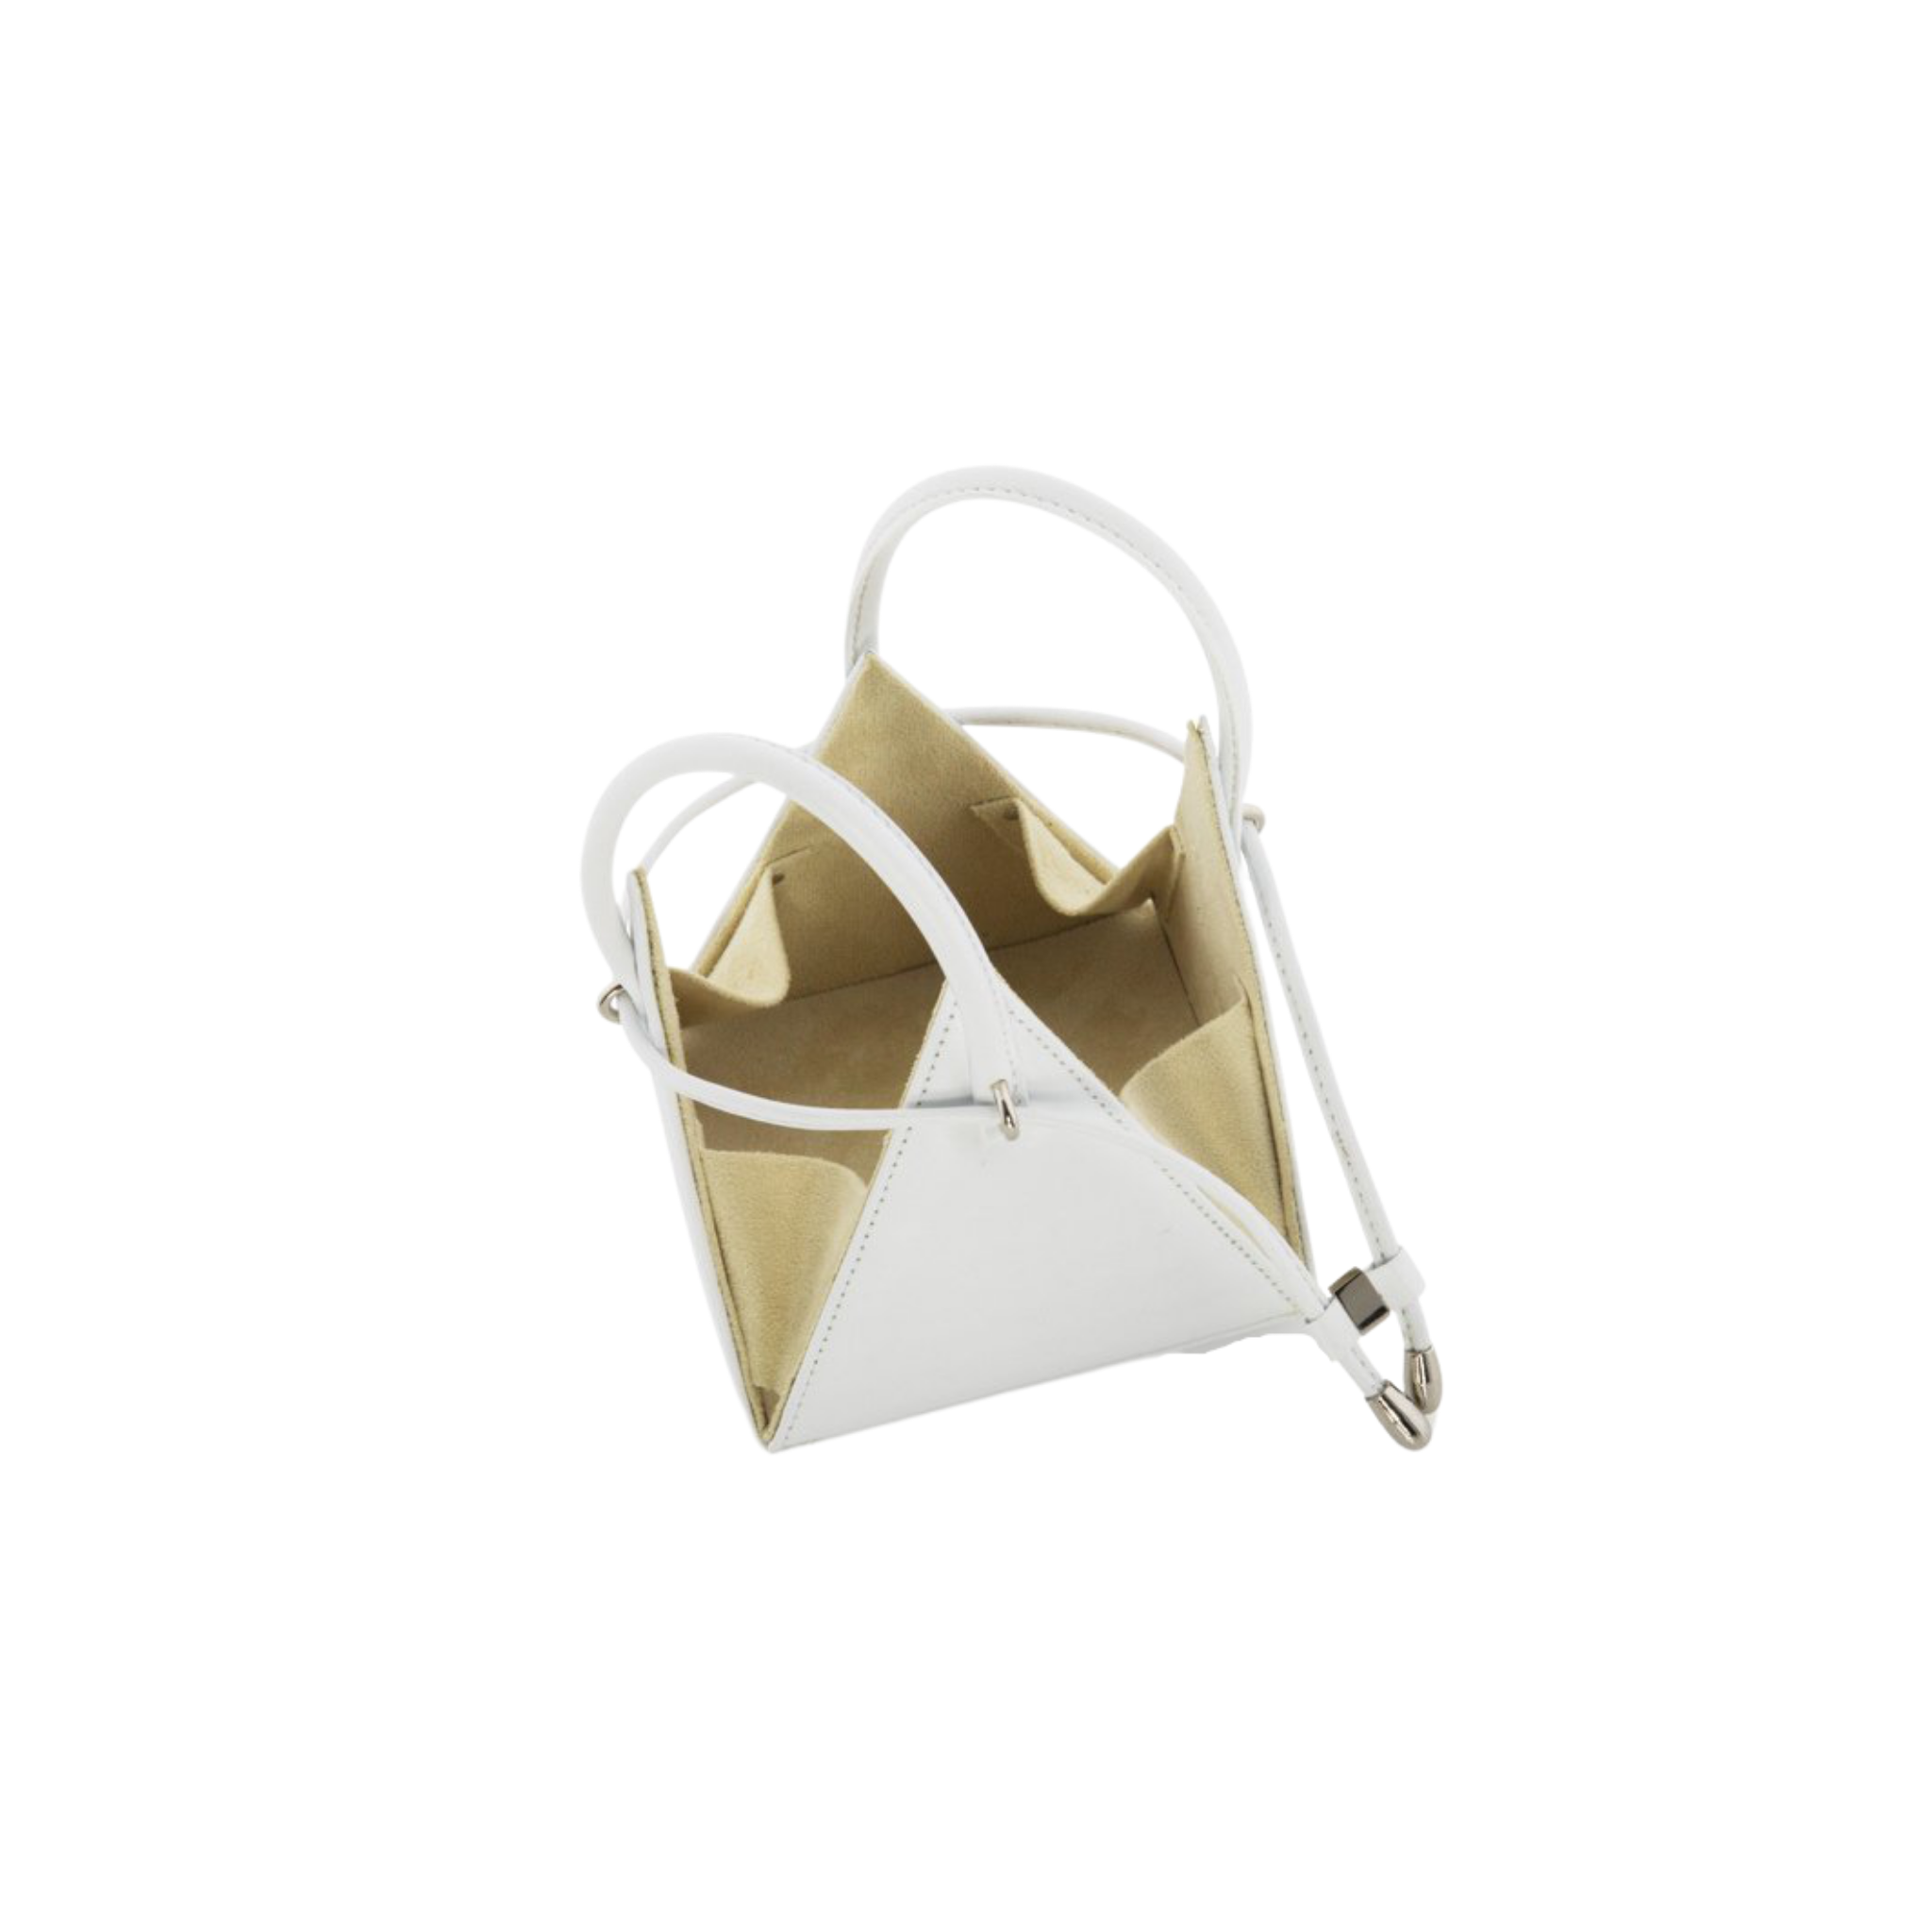 Buy now the Iconic LIA Mini bag inspired by the geometric shapes of our designer's birth city Barcelona, and its world known artist, Antonio Gaudí, architect of the world wonder La Sagrada Familia. The Iconic Lia White Mini bag has a unique and functional pyramidal design able to fit all your essentials. 